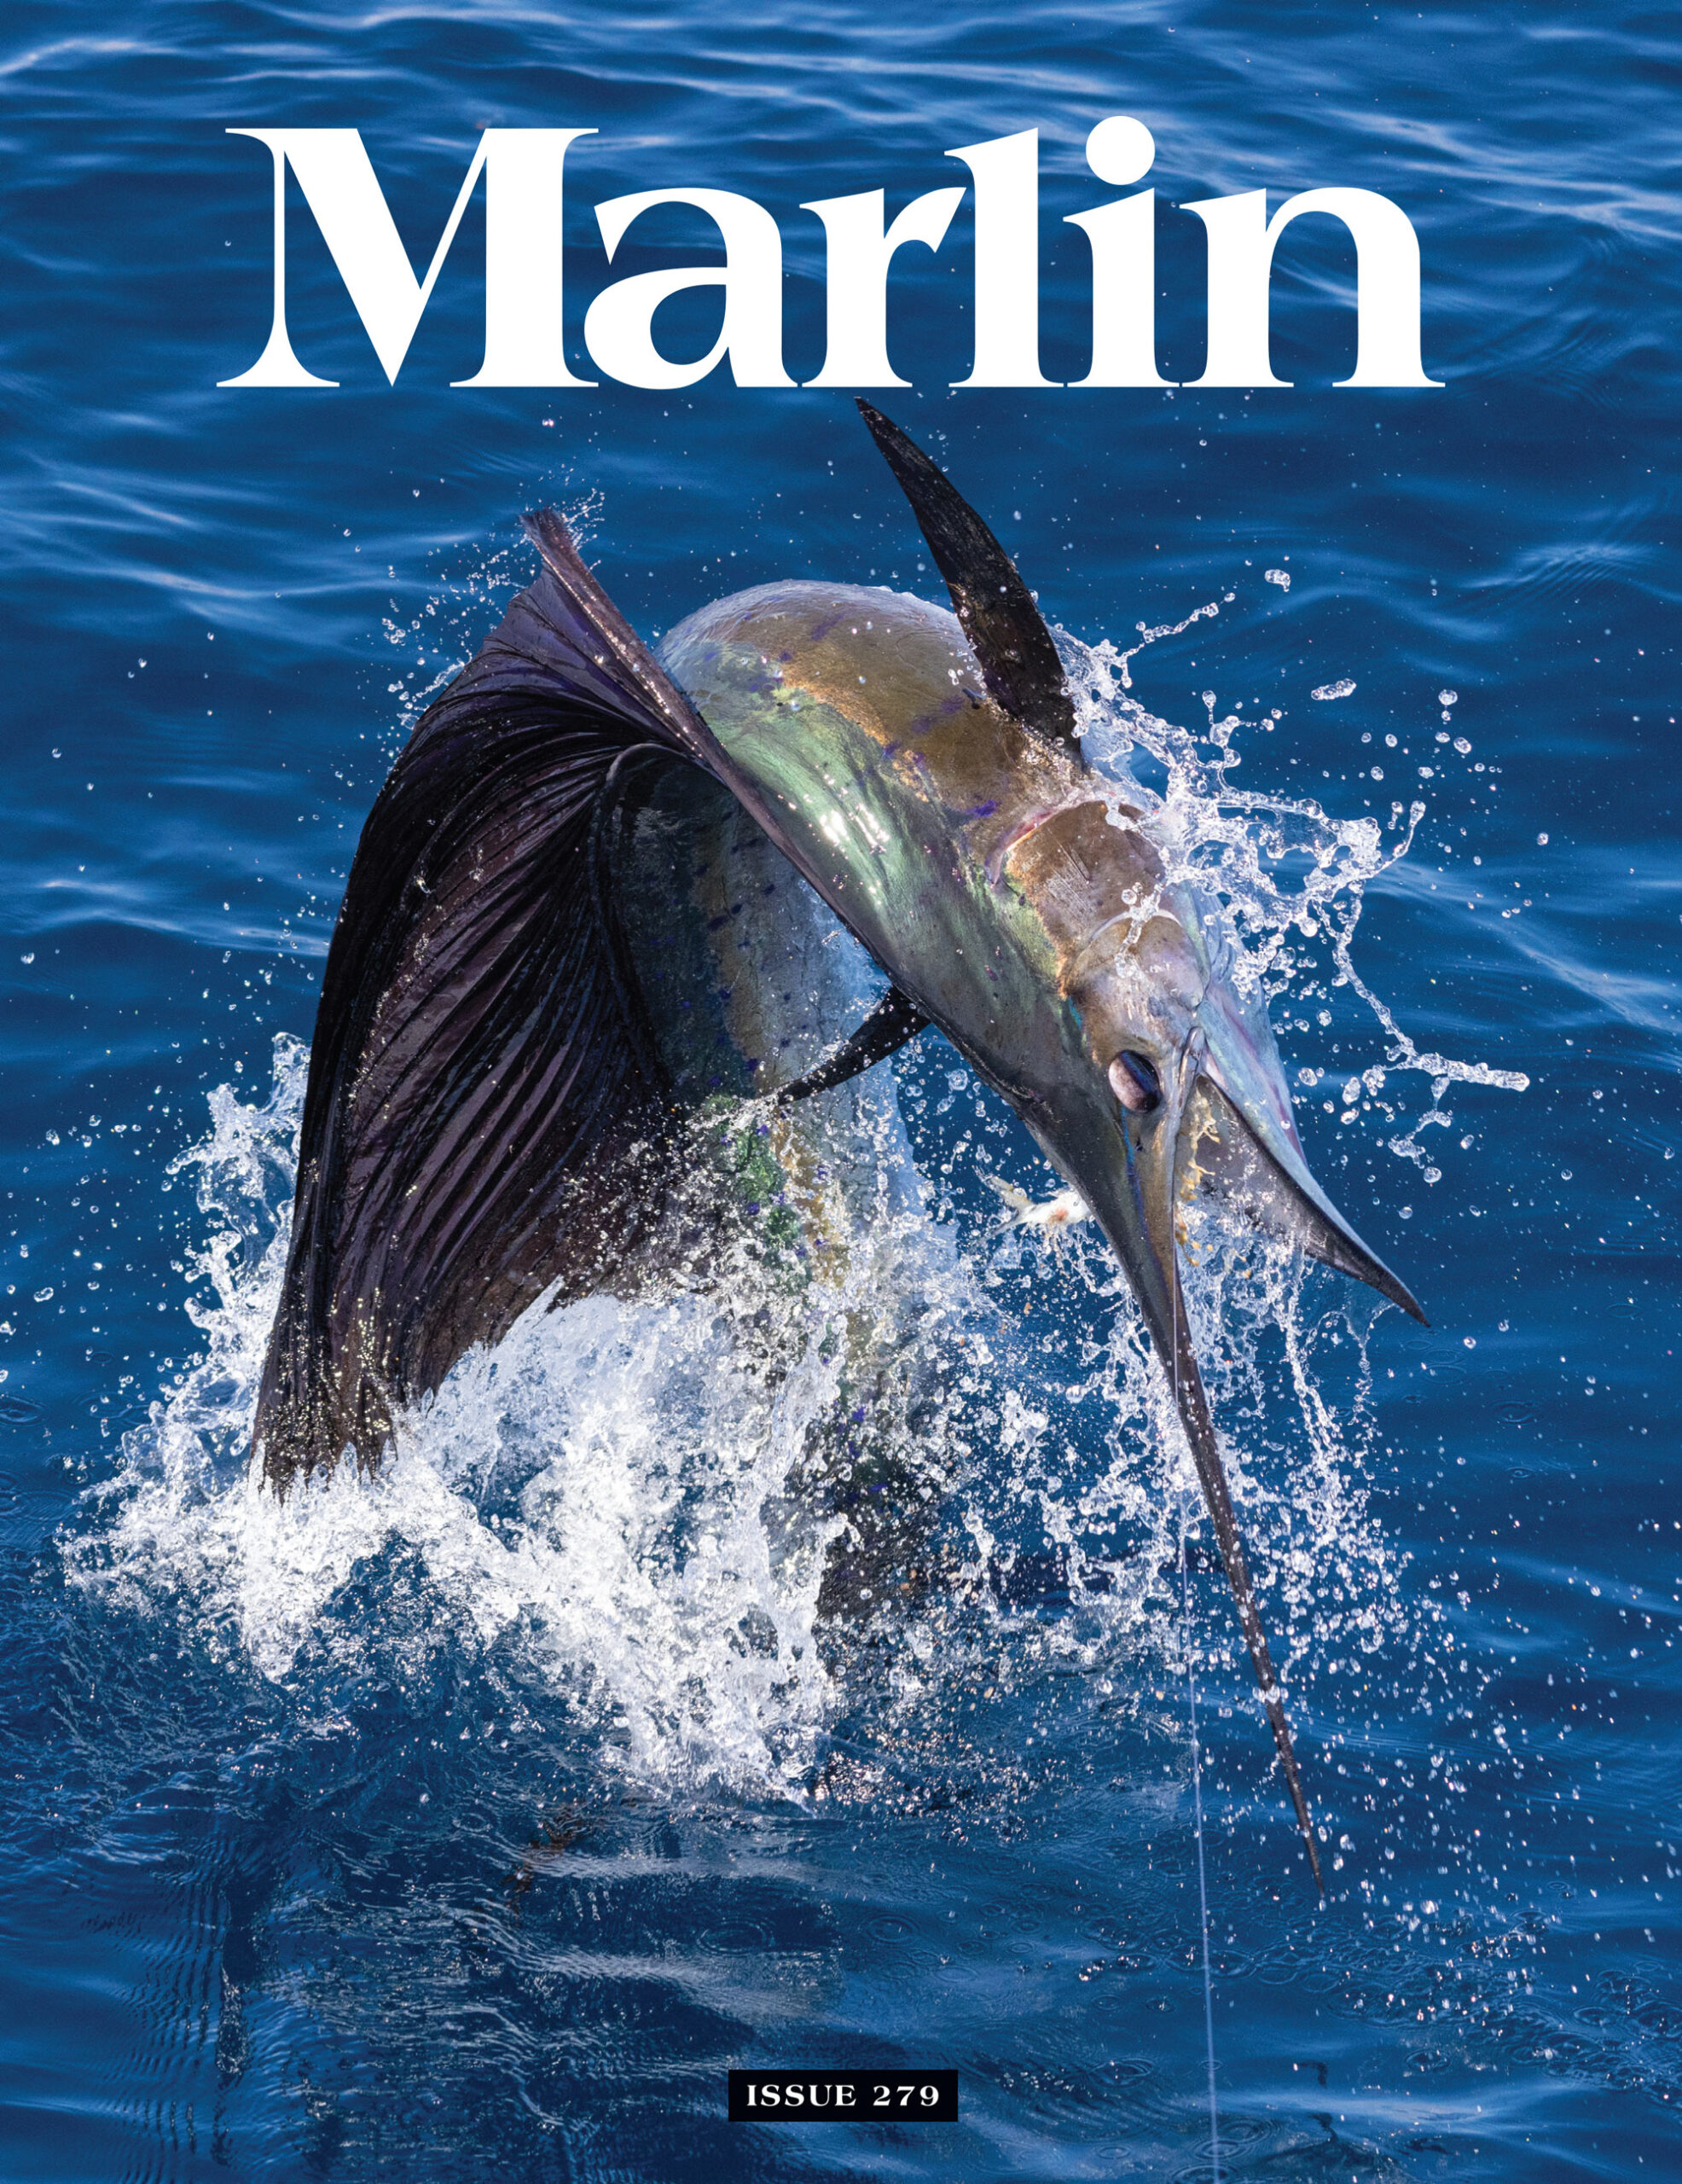 Cover of Issue 279 of Marlin Magazine, featuring a large billfish splashing out of the ocean.